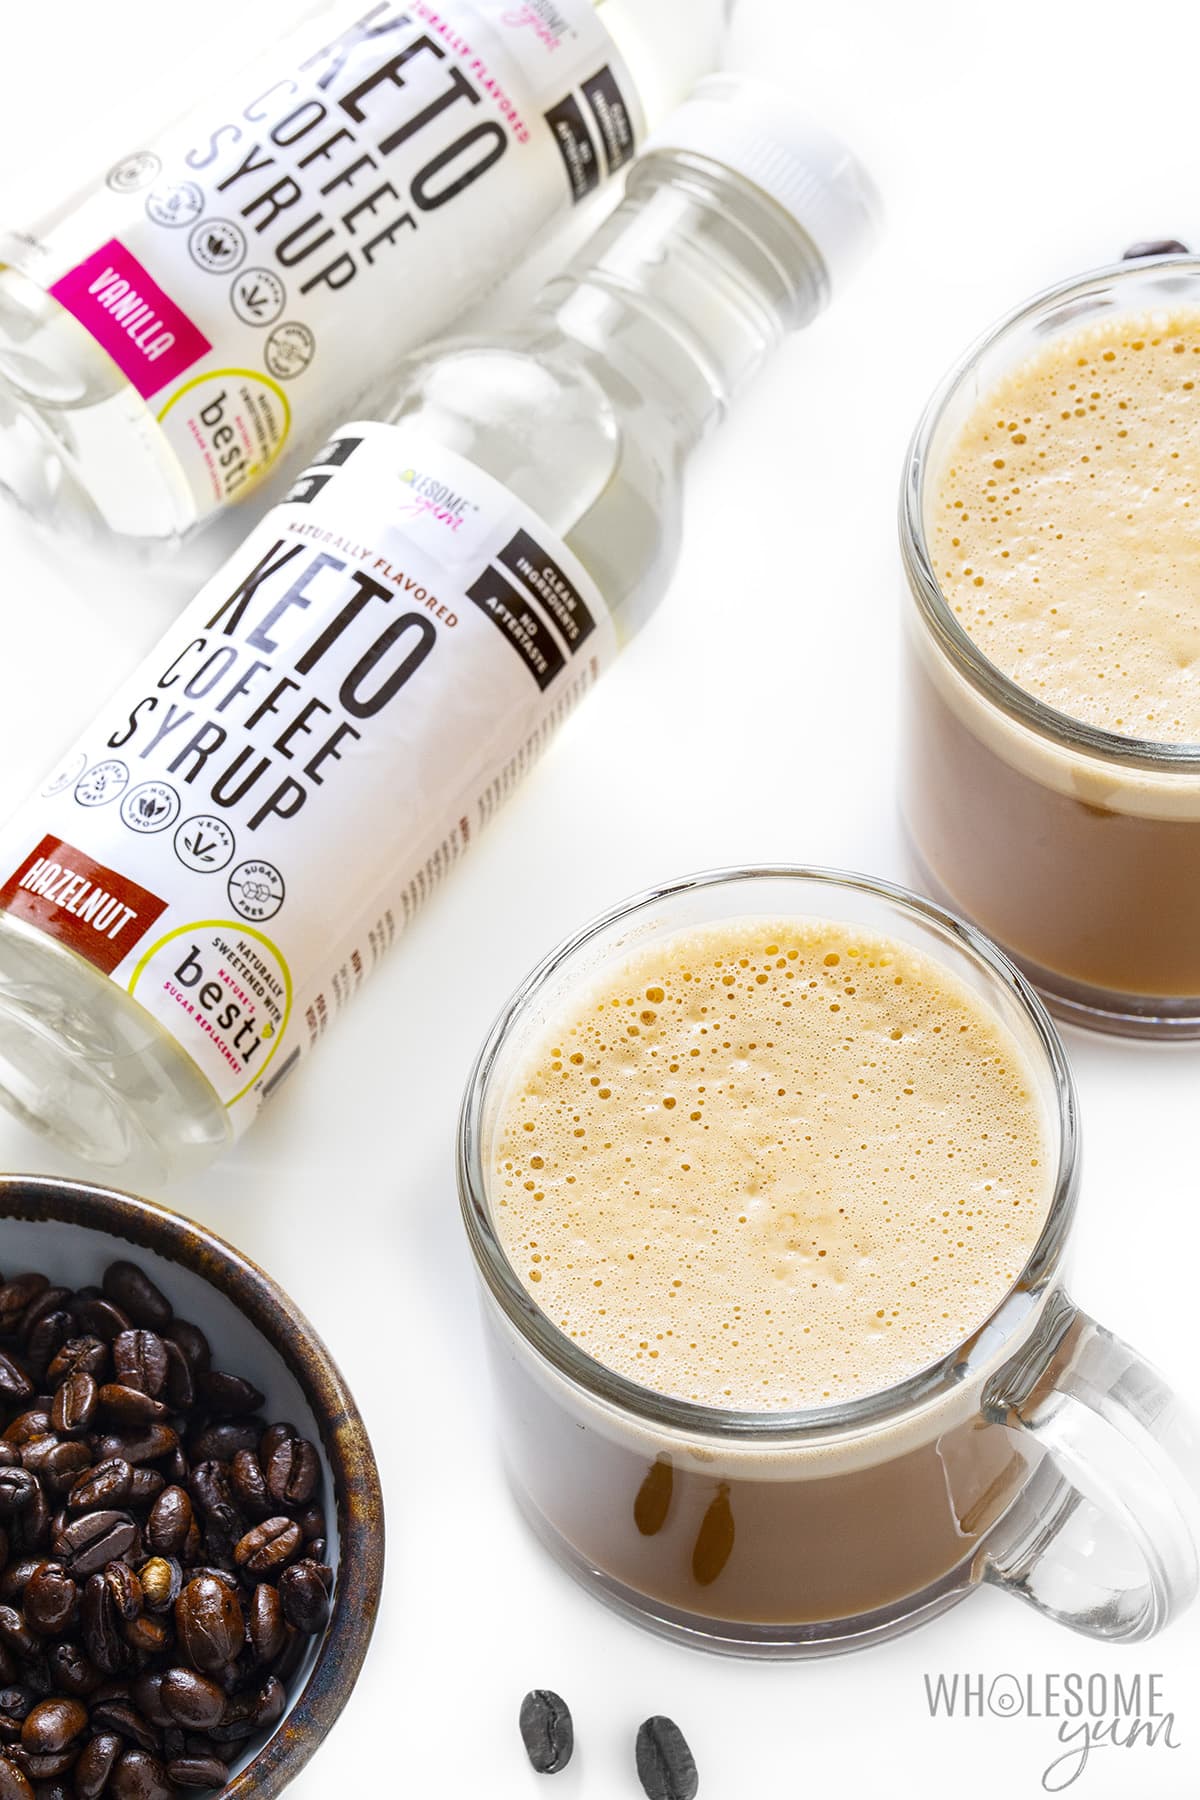 Bulletproof coffee next to bottles of Wholesome Yum keto coffee syrups.